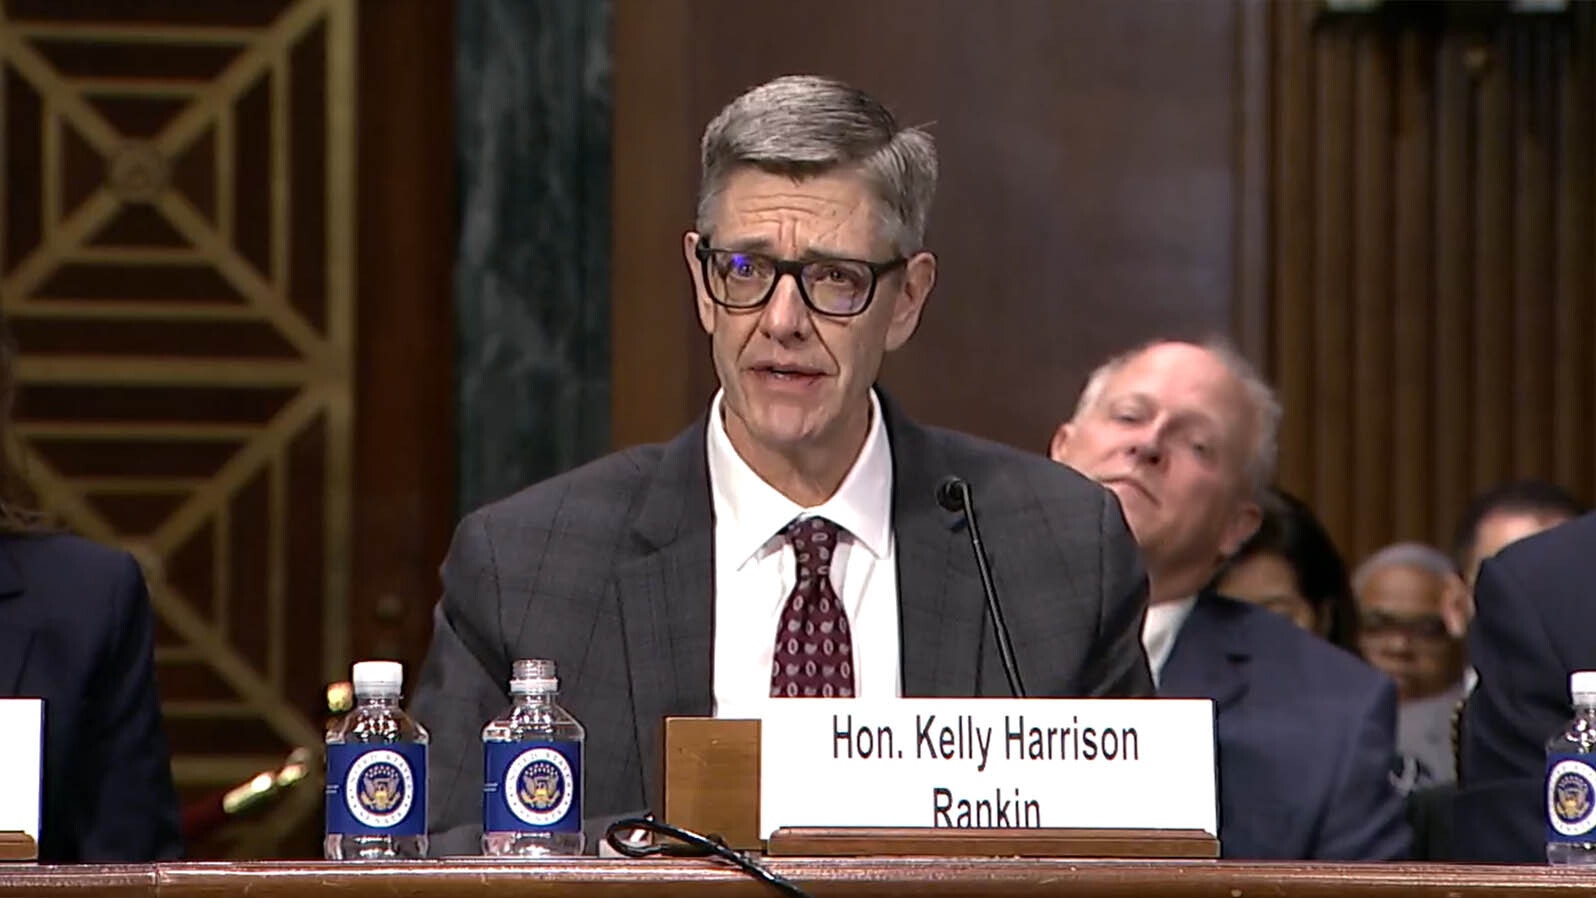 Wyoming Judge Kelly Rankin testifying for the U.S. Senate Committee on the Judiciary on Wednesday about his nomination to the U.S. District Court for the District of Wyoming.